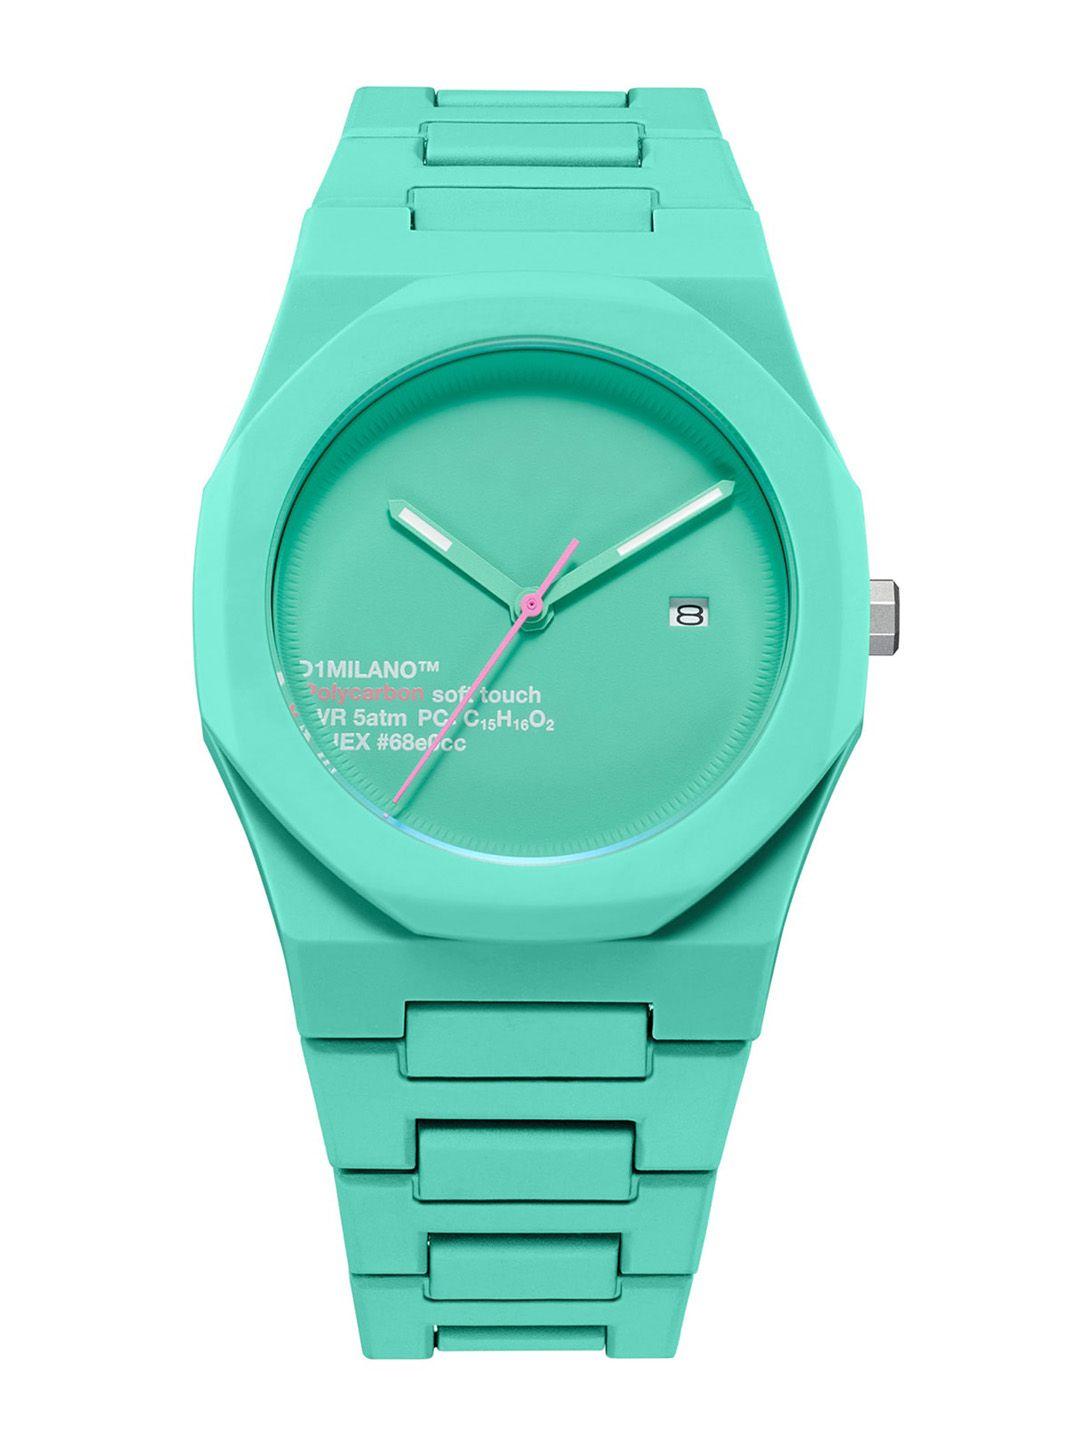 d1 milano women printed dial & textured straps analogue watch- pcbj31